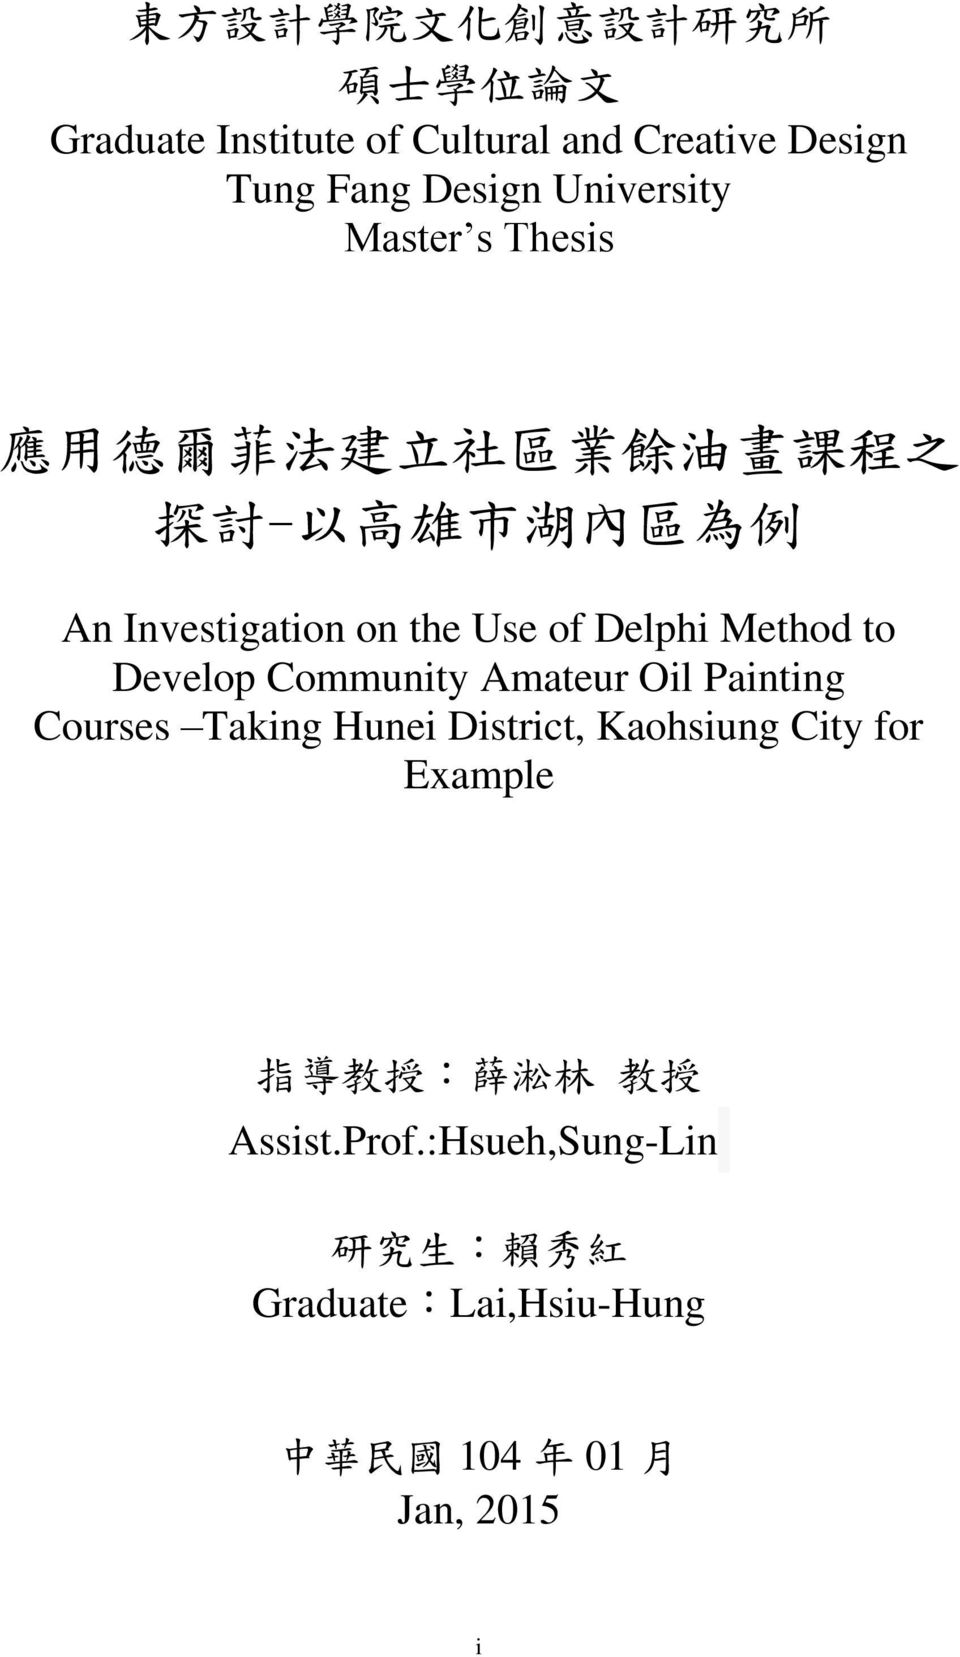 of Delphi Method to Develop Community Amateur Oil Painting Courses Taking Hunei District, Kaohsiung City for